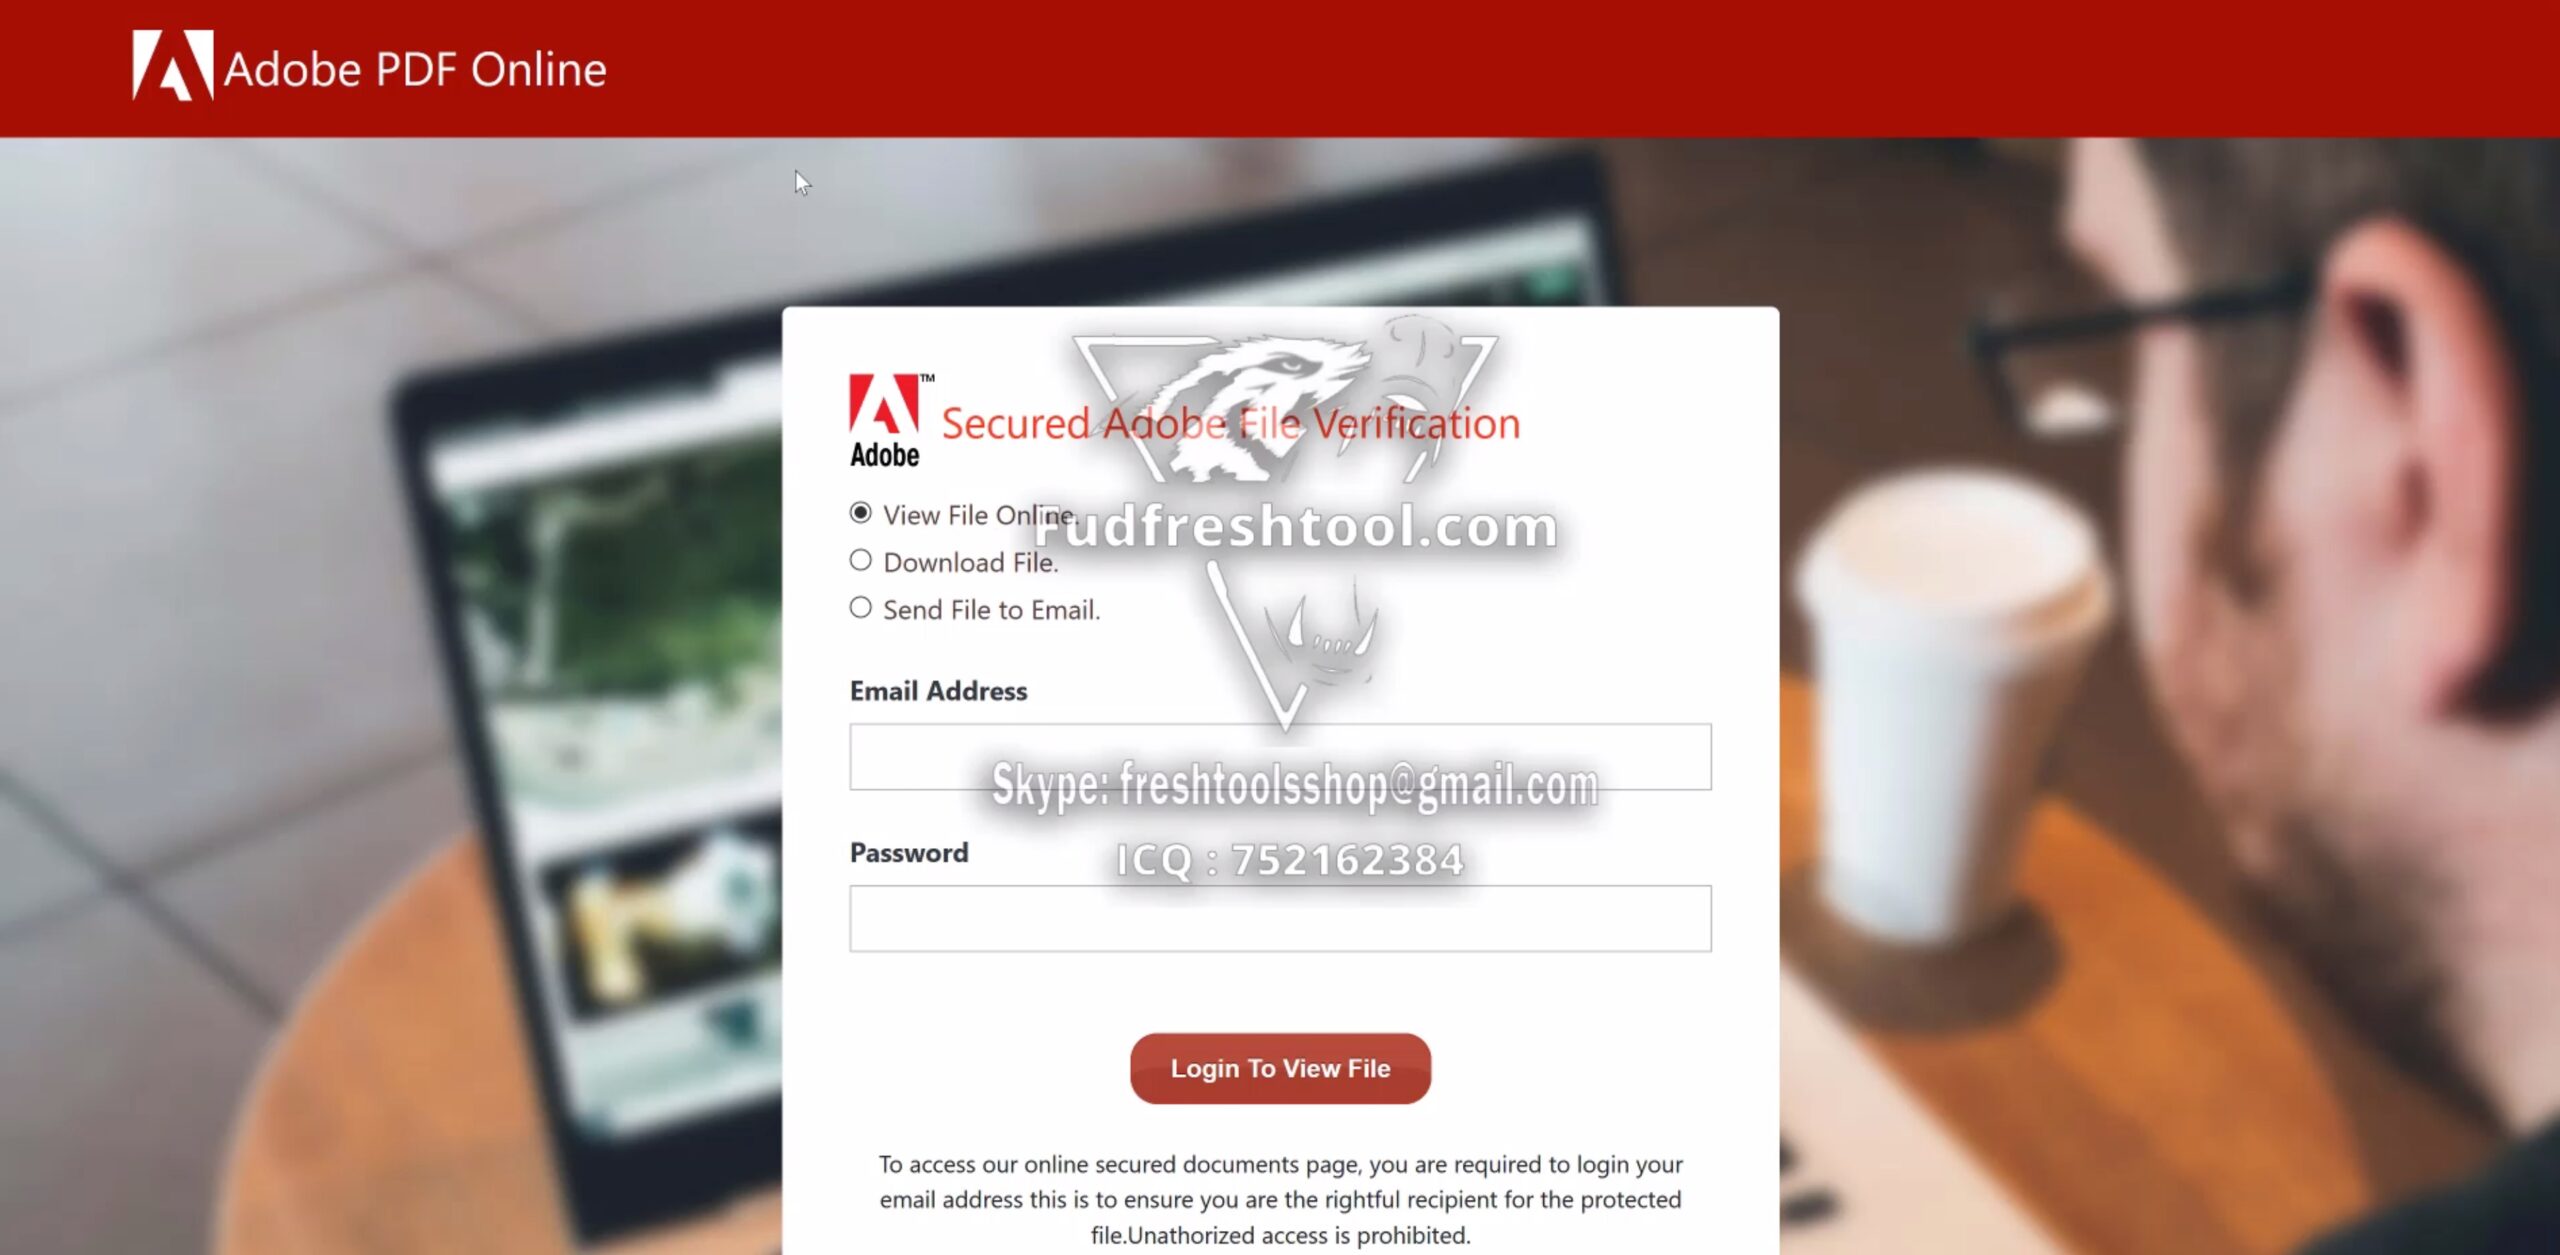 Adobe Latest Scam Page